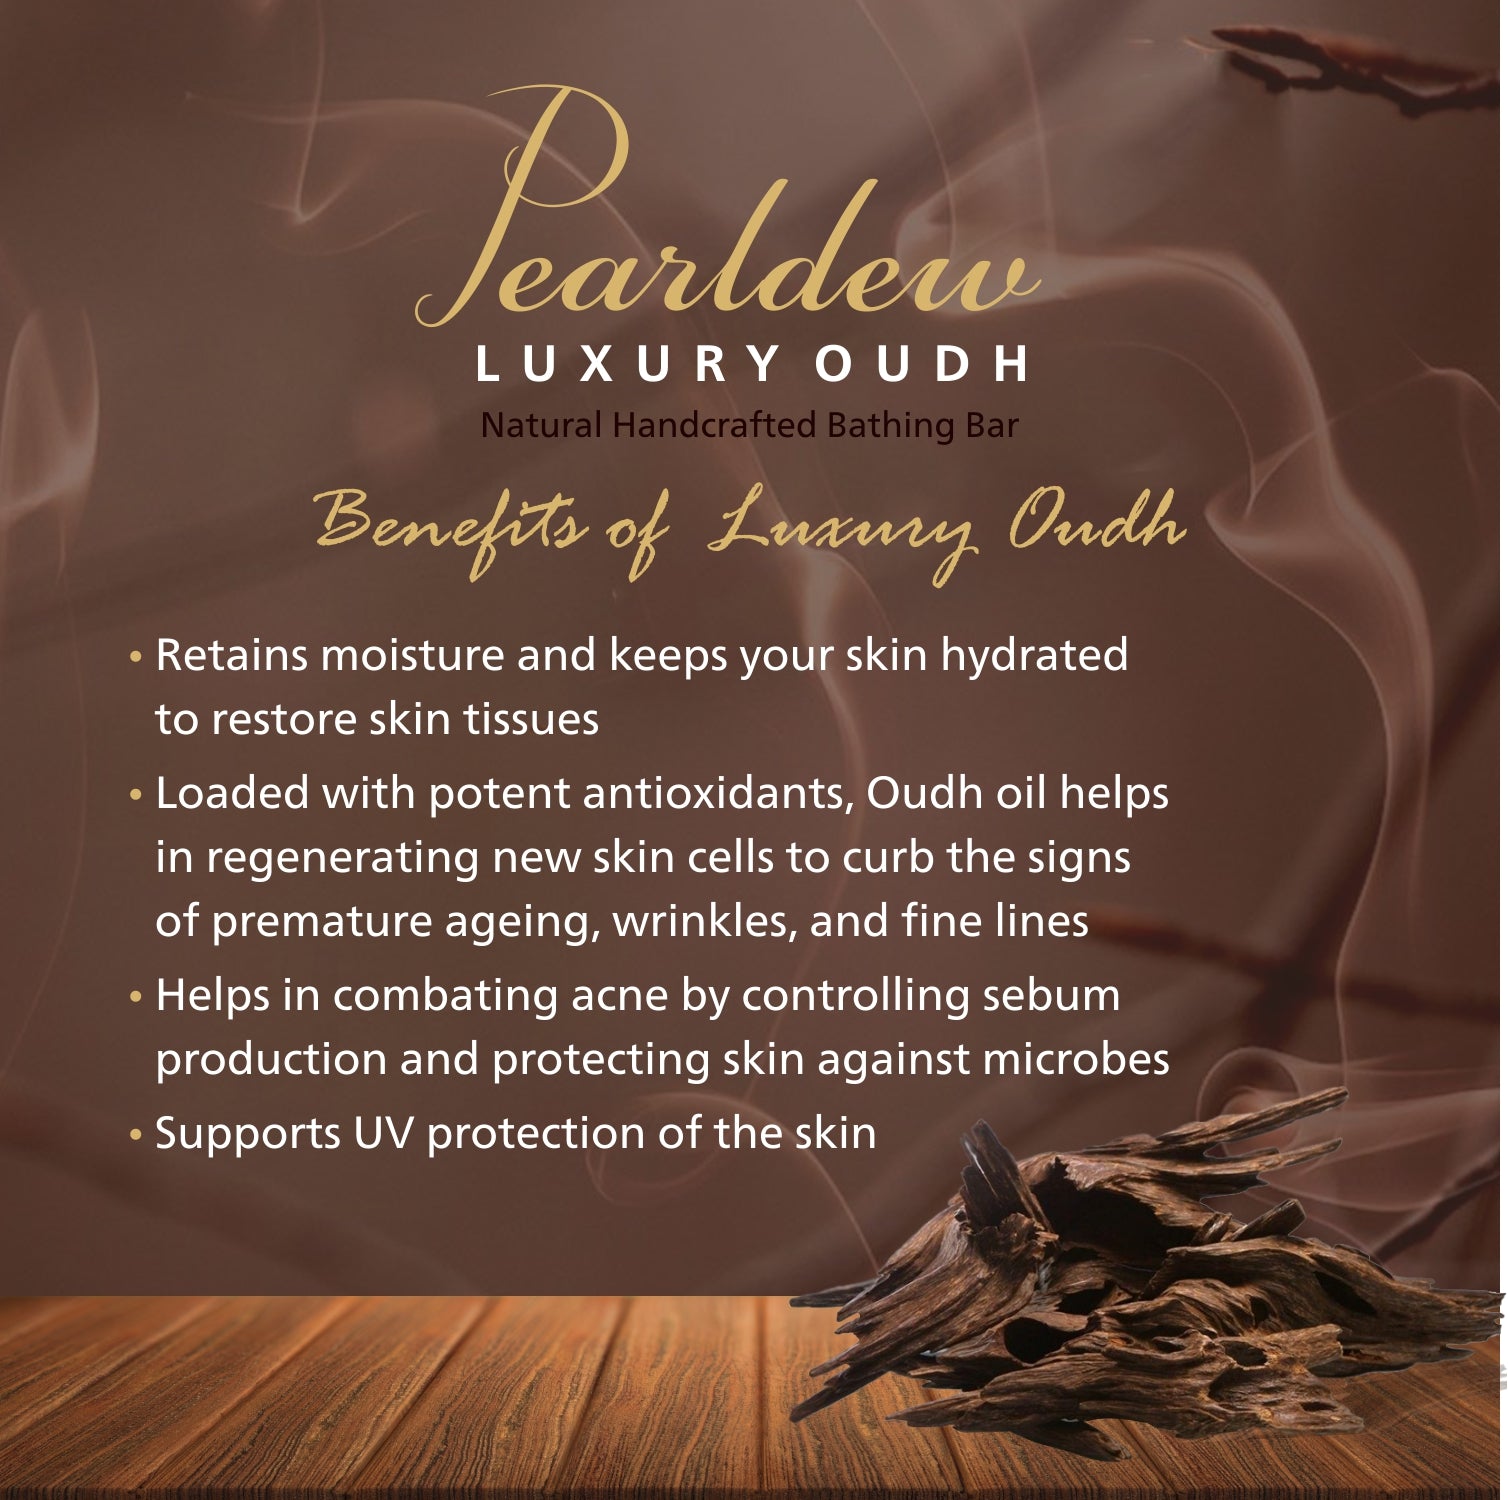 Pearldew Luxury Oudh Natural Handcrafted Bathing Bar (75 gm)